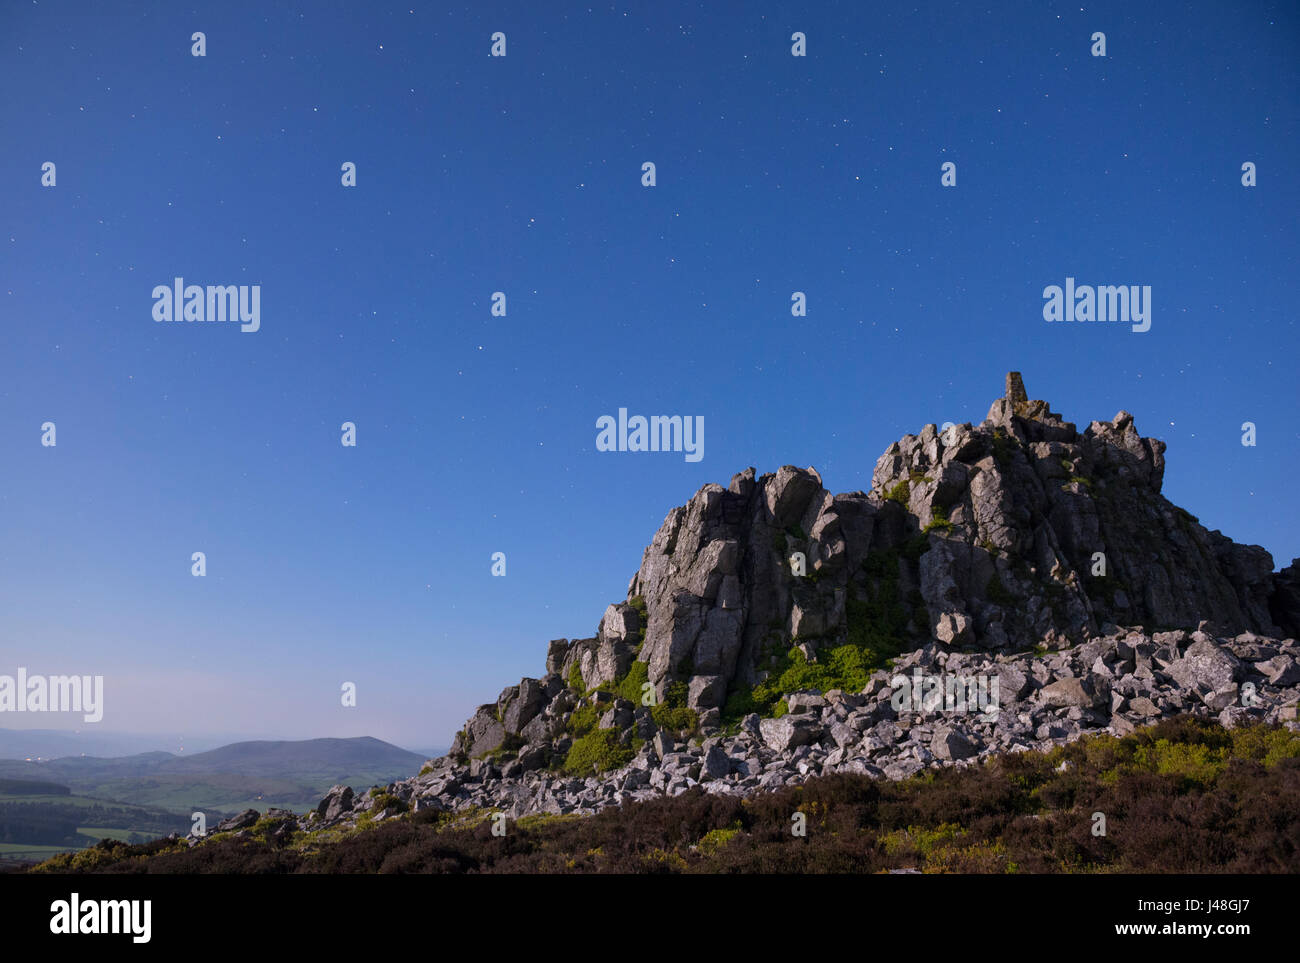 Manstone Rock on the Stiperstones, Shropshire, illuminated by moonlight, with Corndon Hill, Powys. Stock Photo